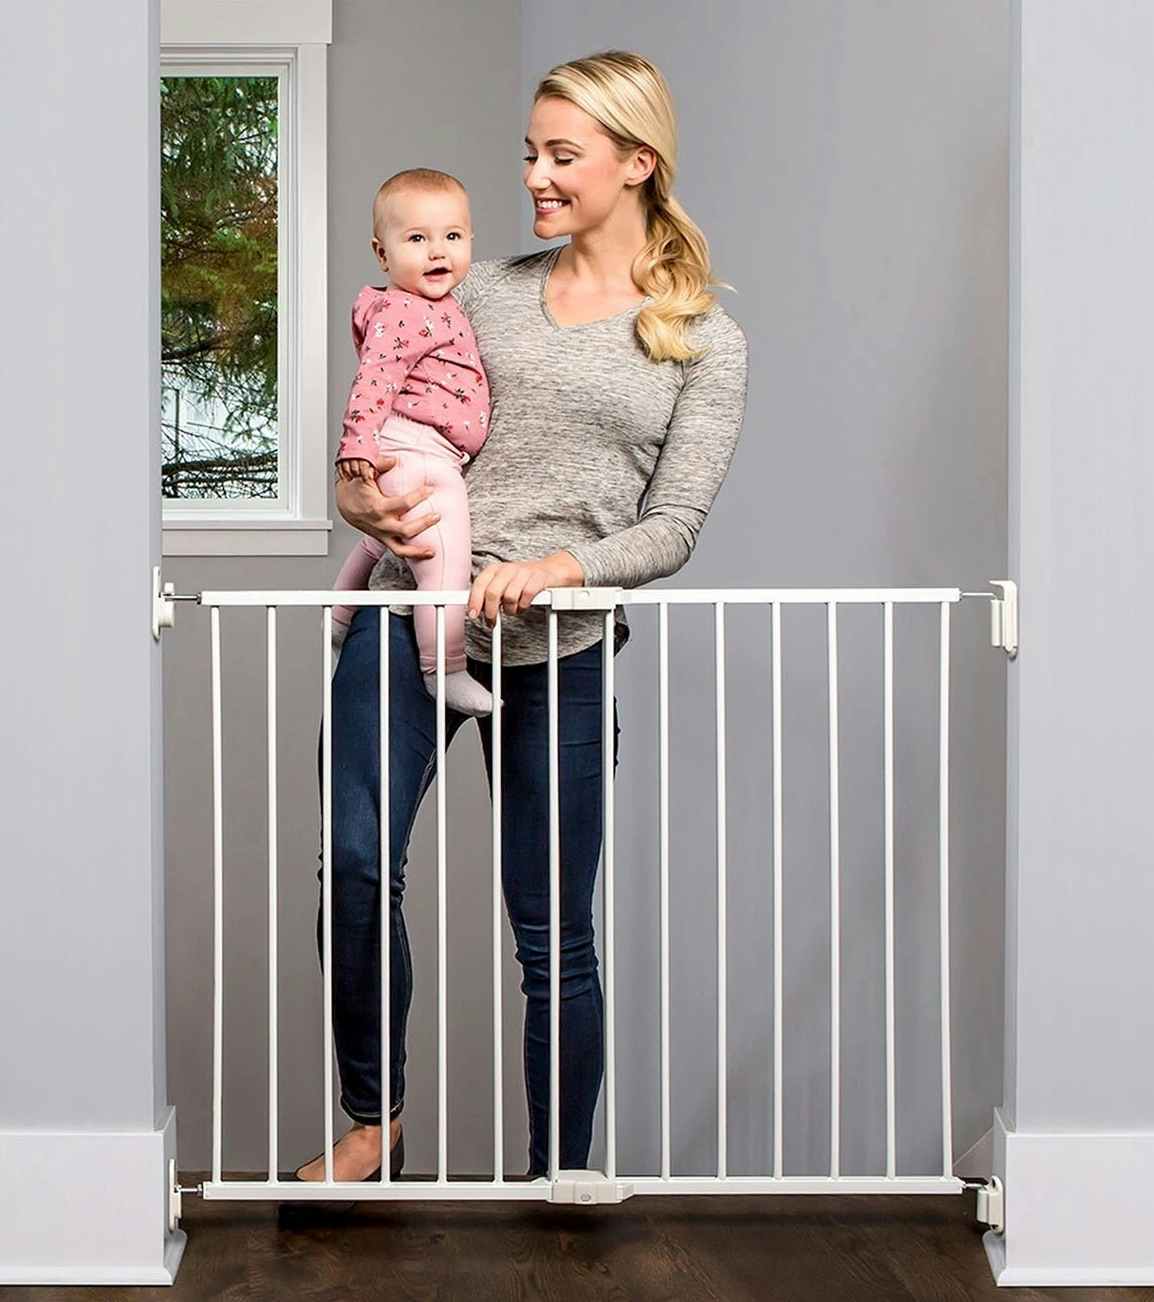 woman opening a top of the stairs baby gate holding a baby